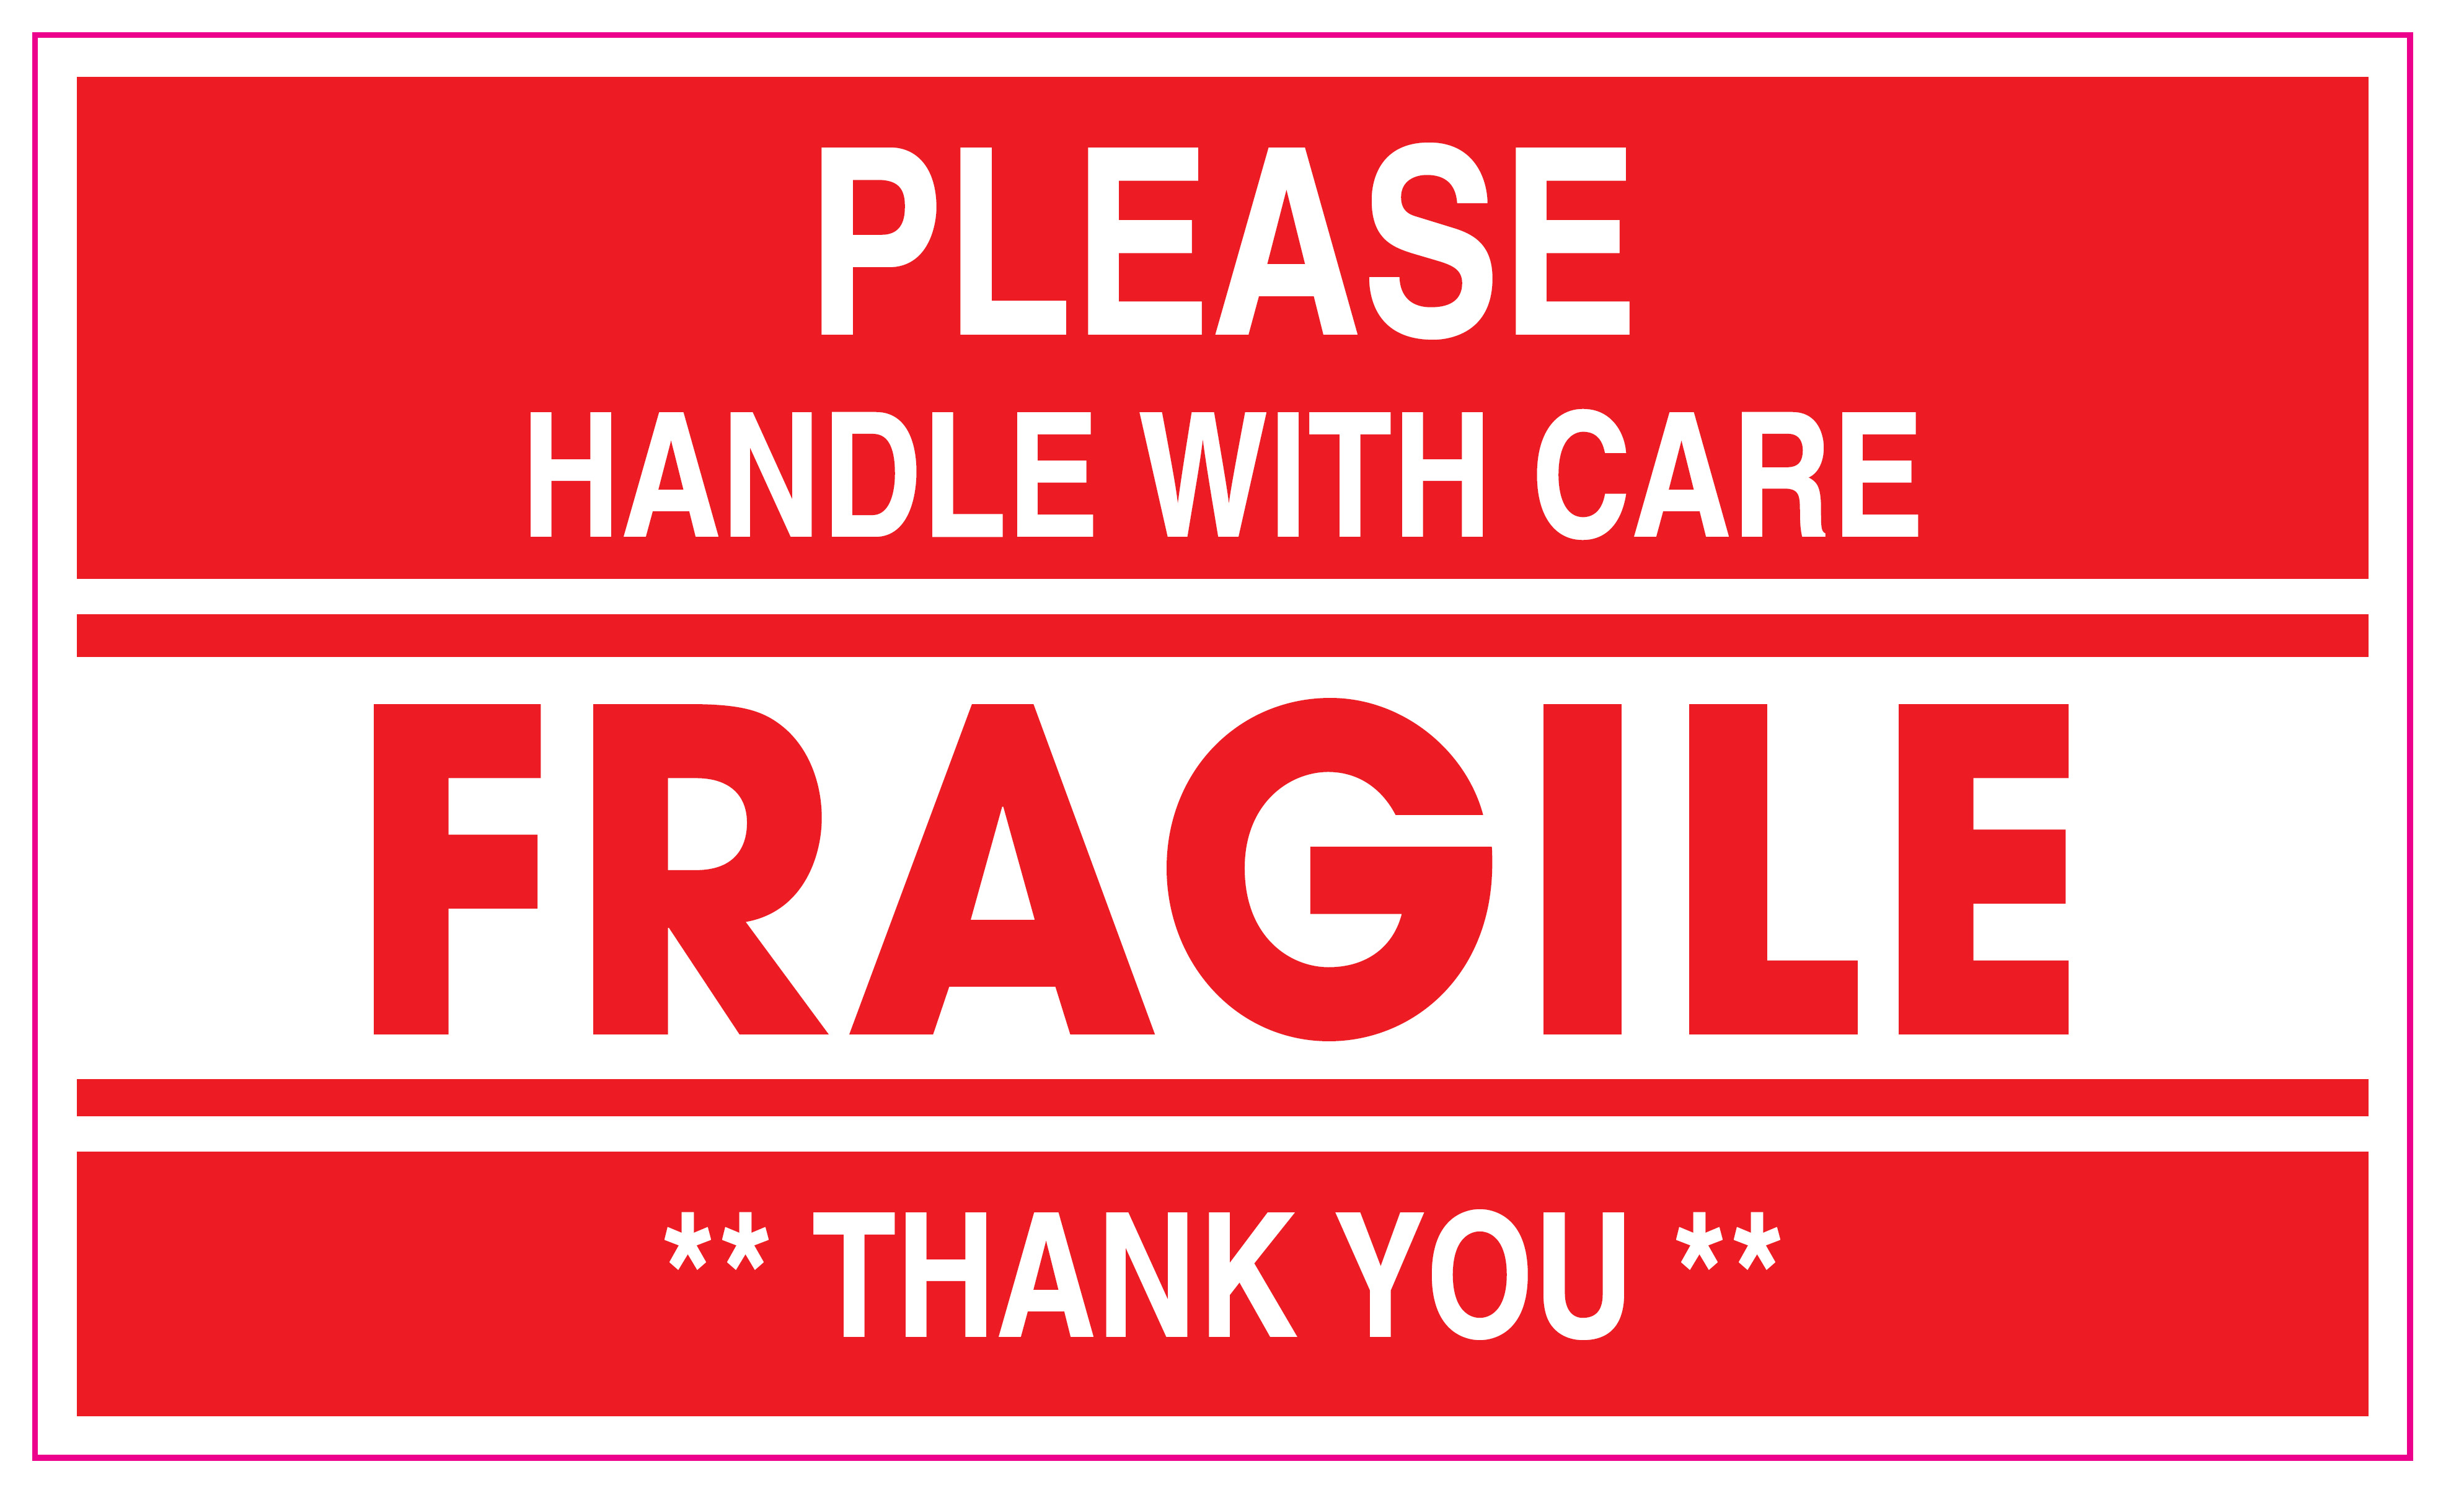 5 Best Images of Free Printable Shipping Label Fragile Fragile Handle